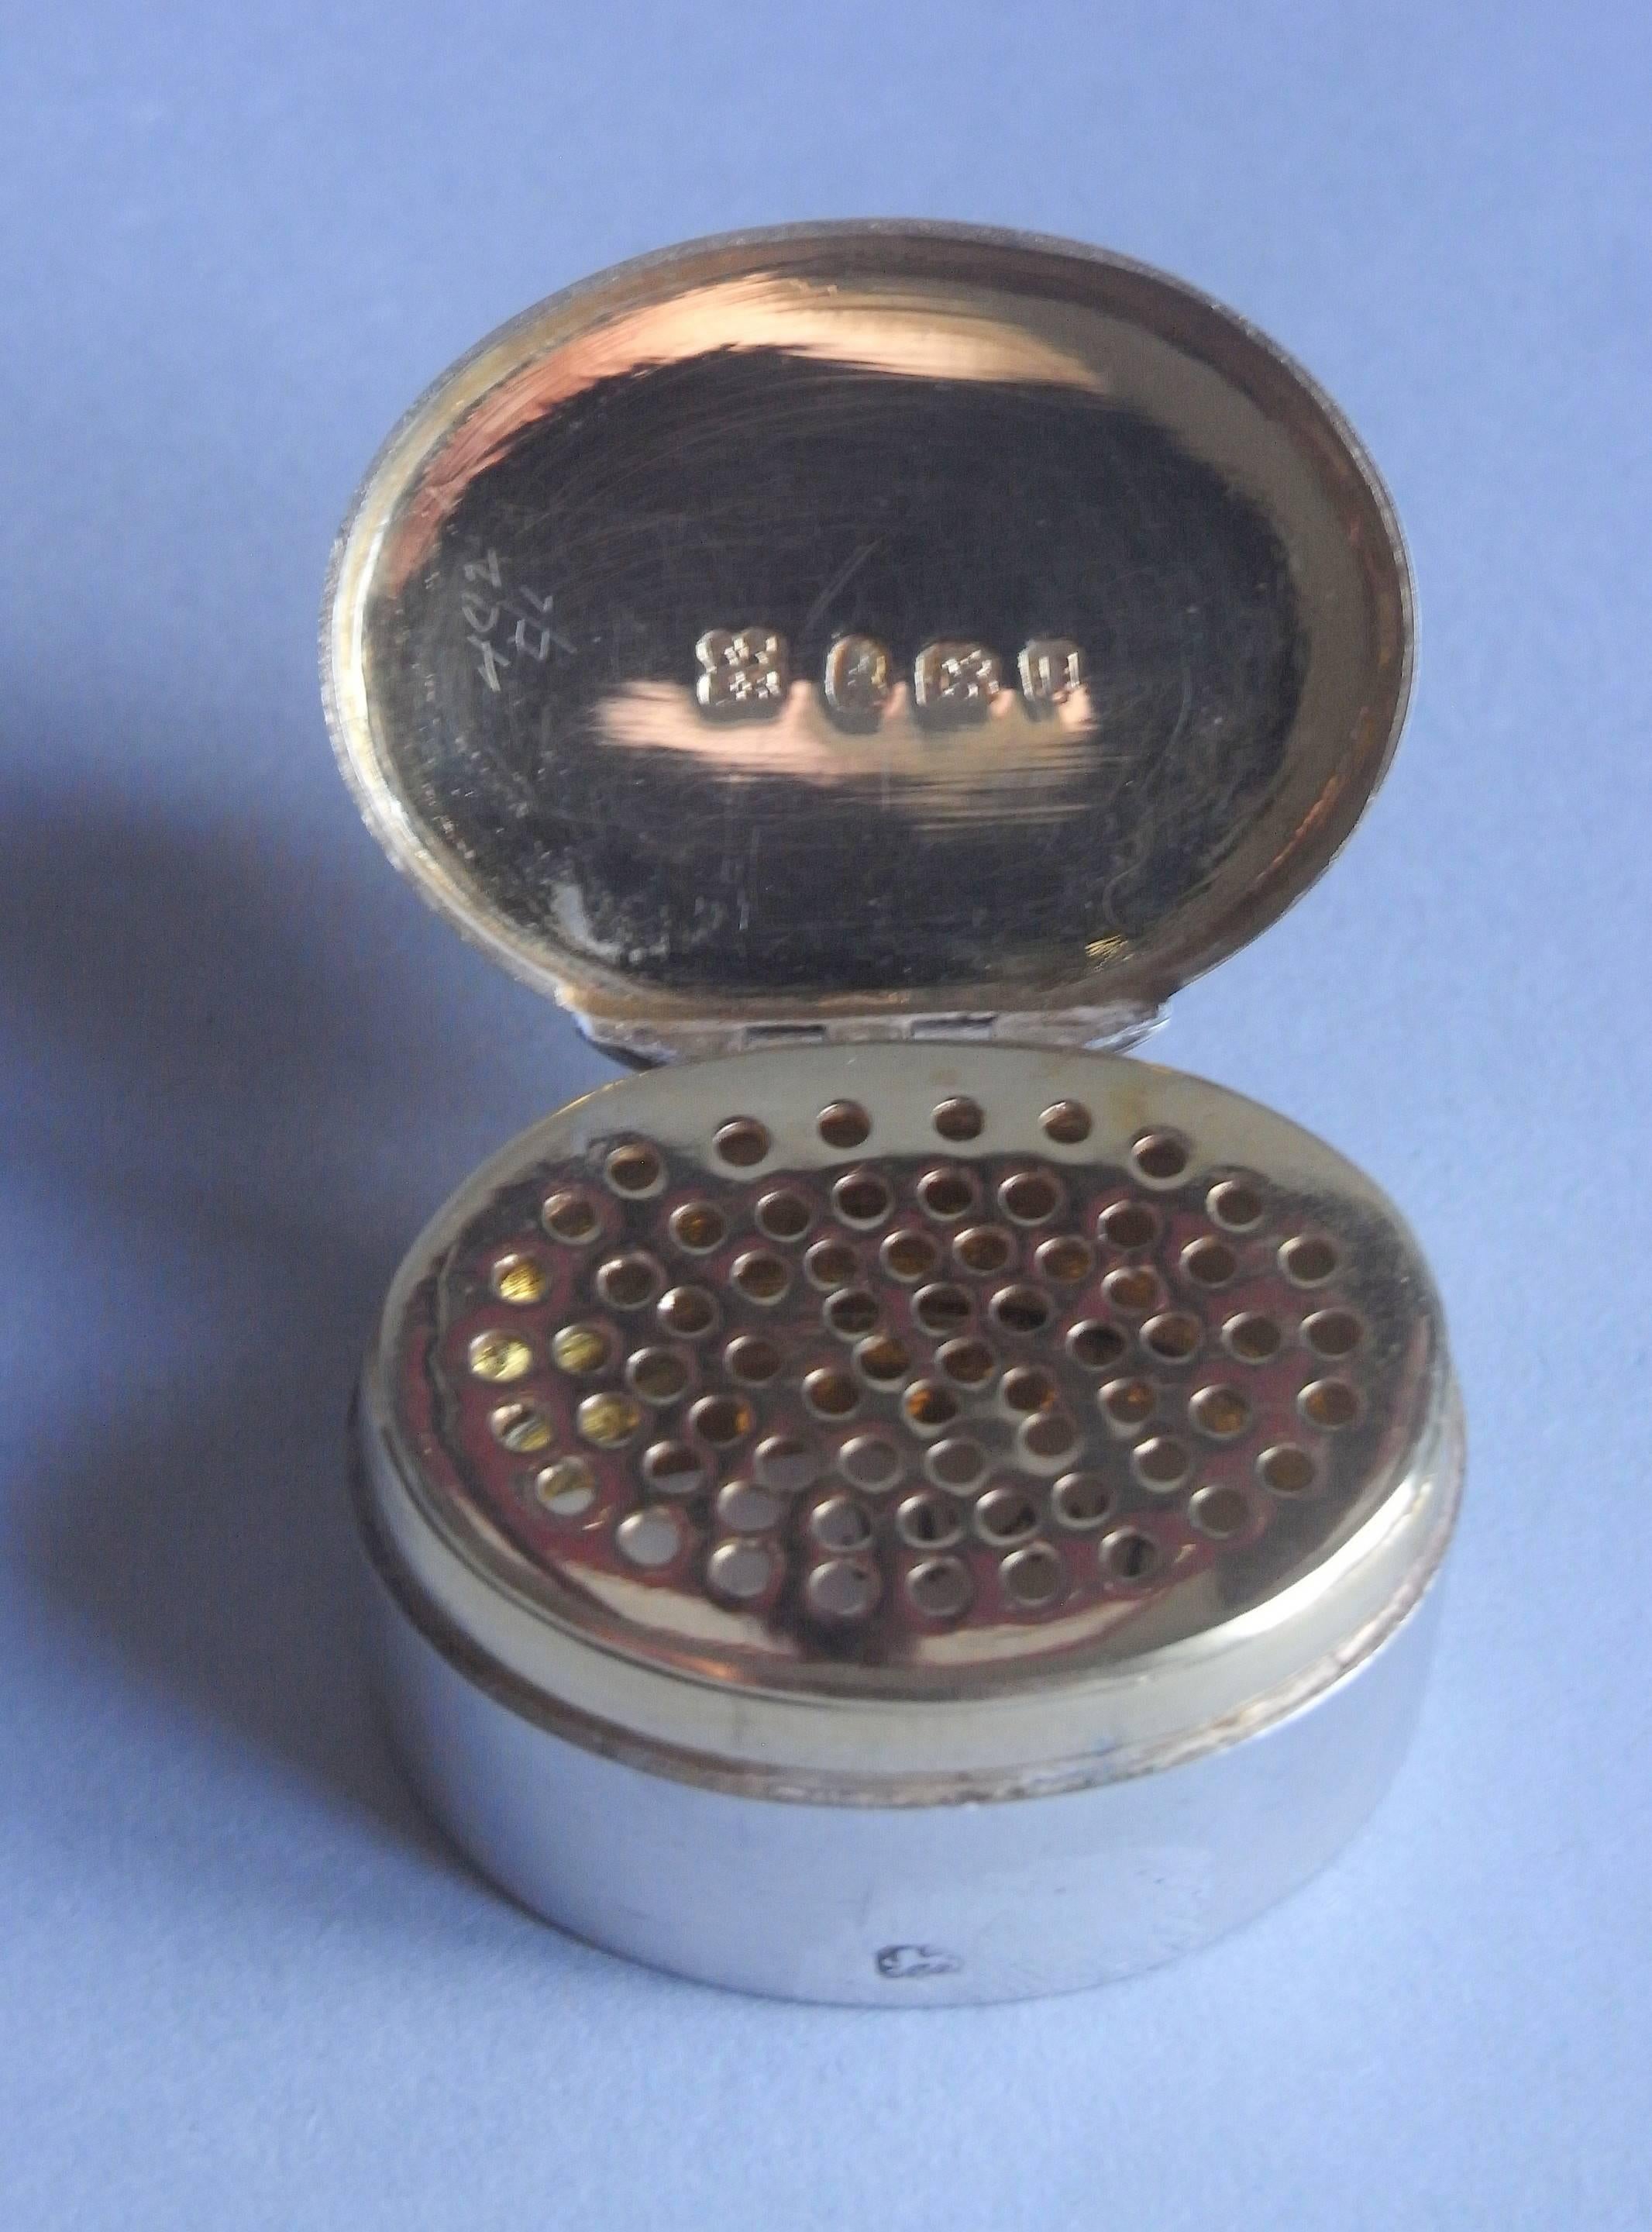 English A very rare 18th Century Vinaigrette made in London in 1795 by Phipps & Robinson